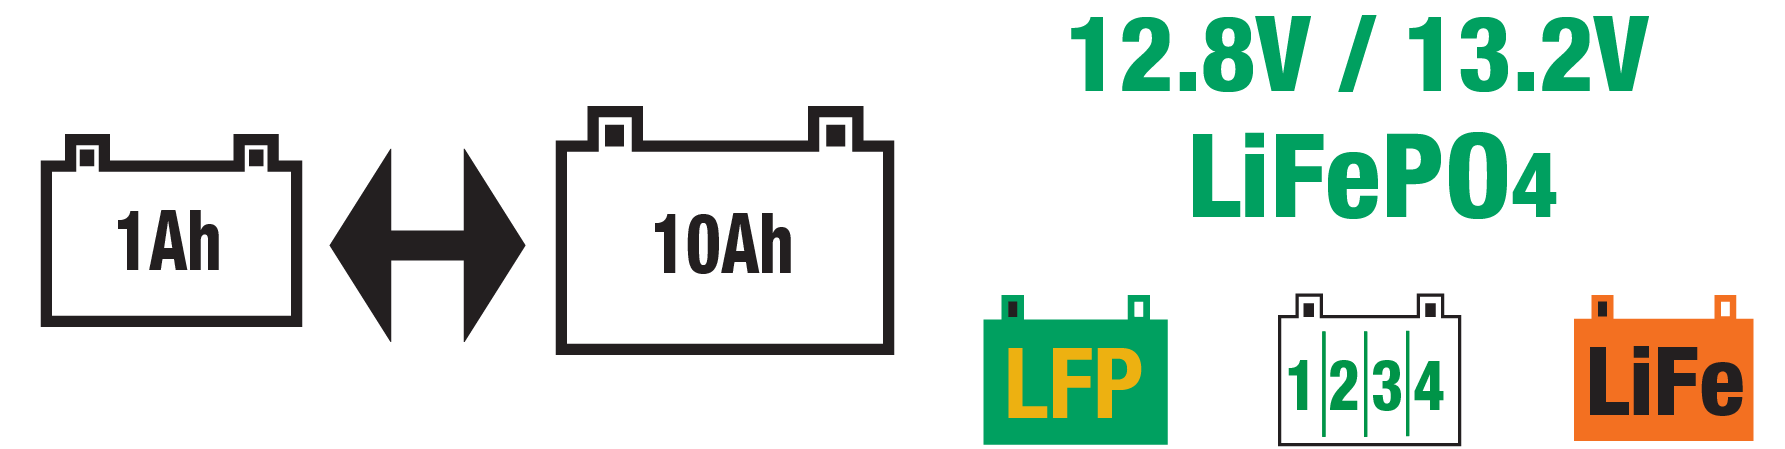 The Lithium 4s 0.8A is ideal for 12.8V/13.2V LiFePO4 or LFP batteries.